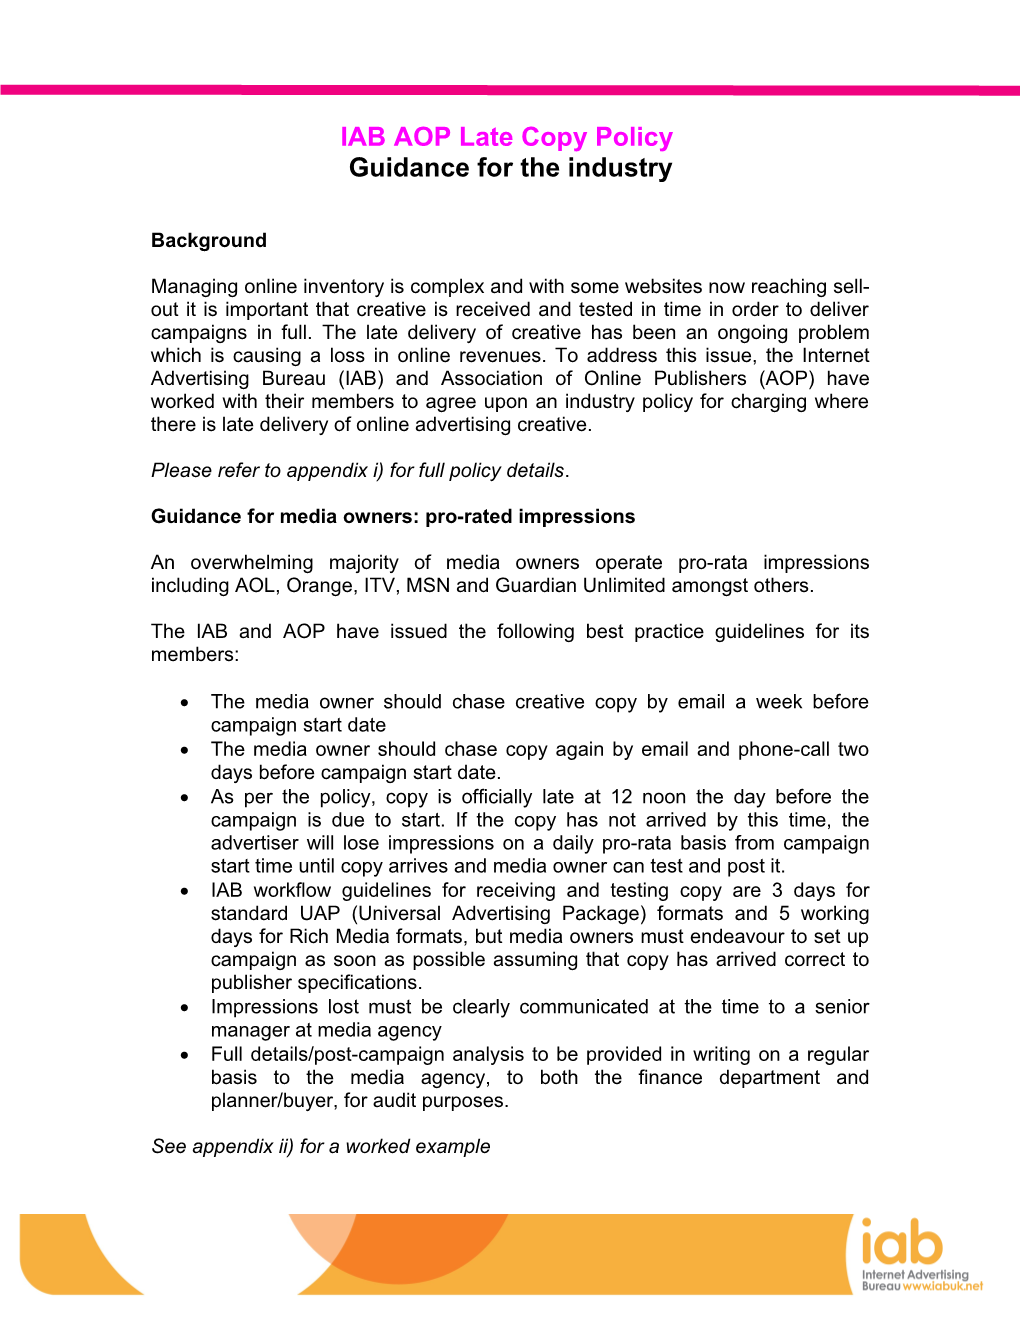 Guidance for the Industry